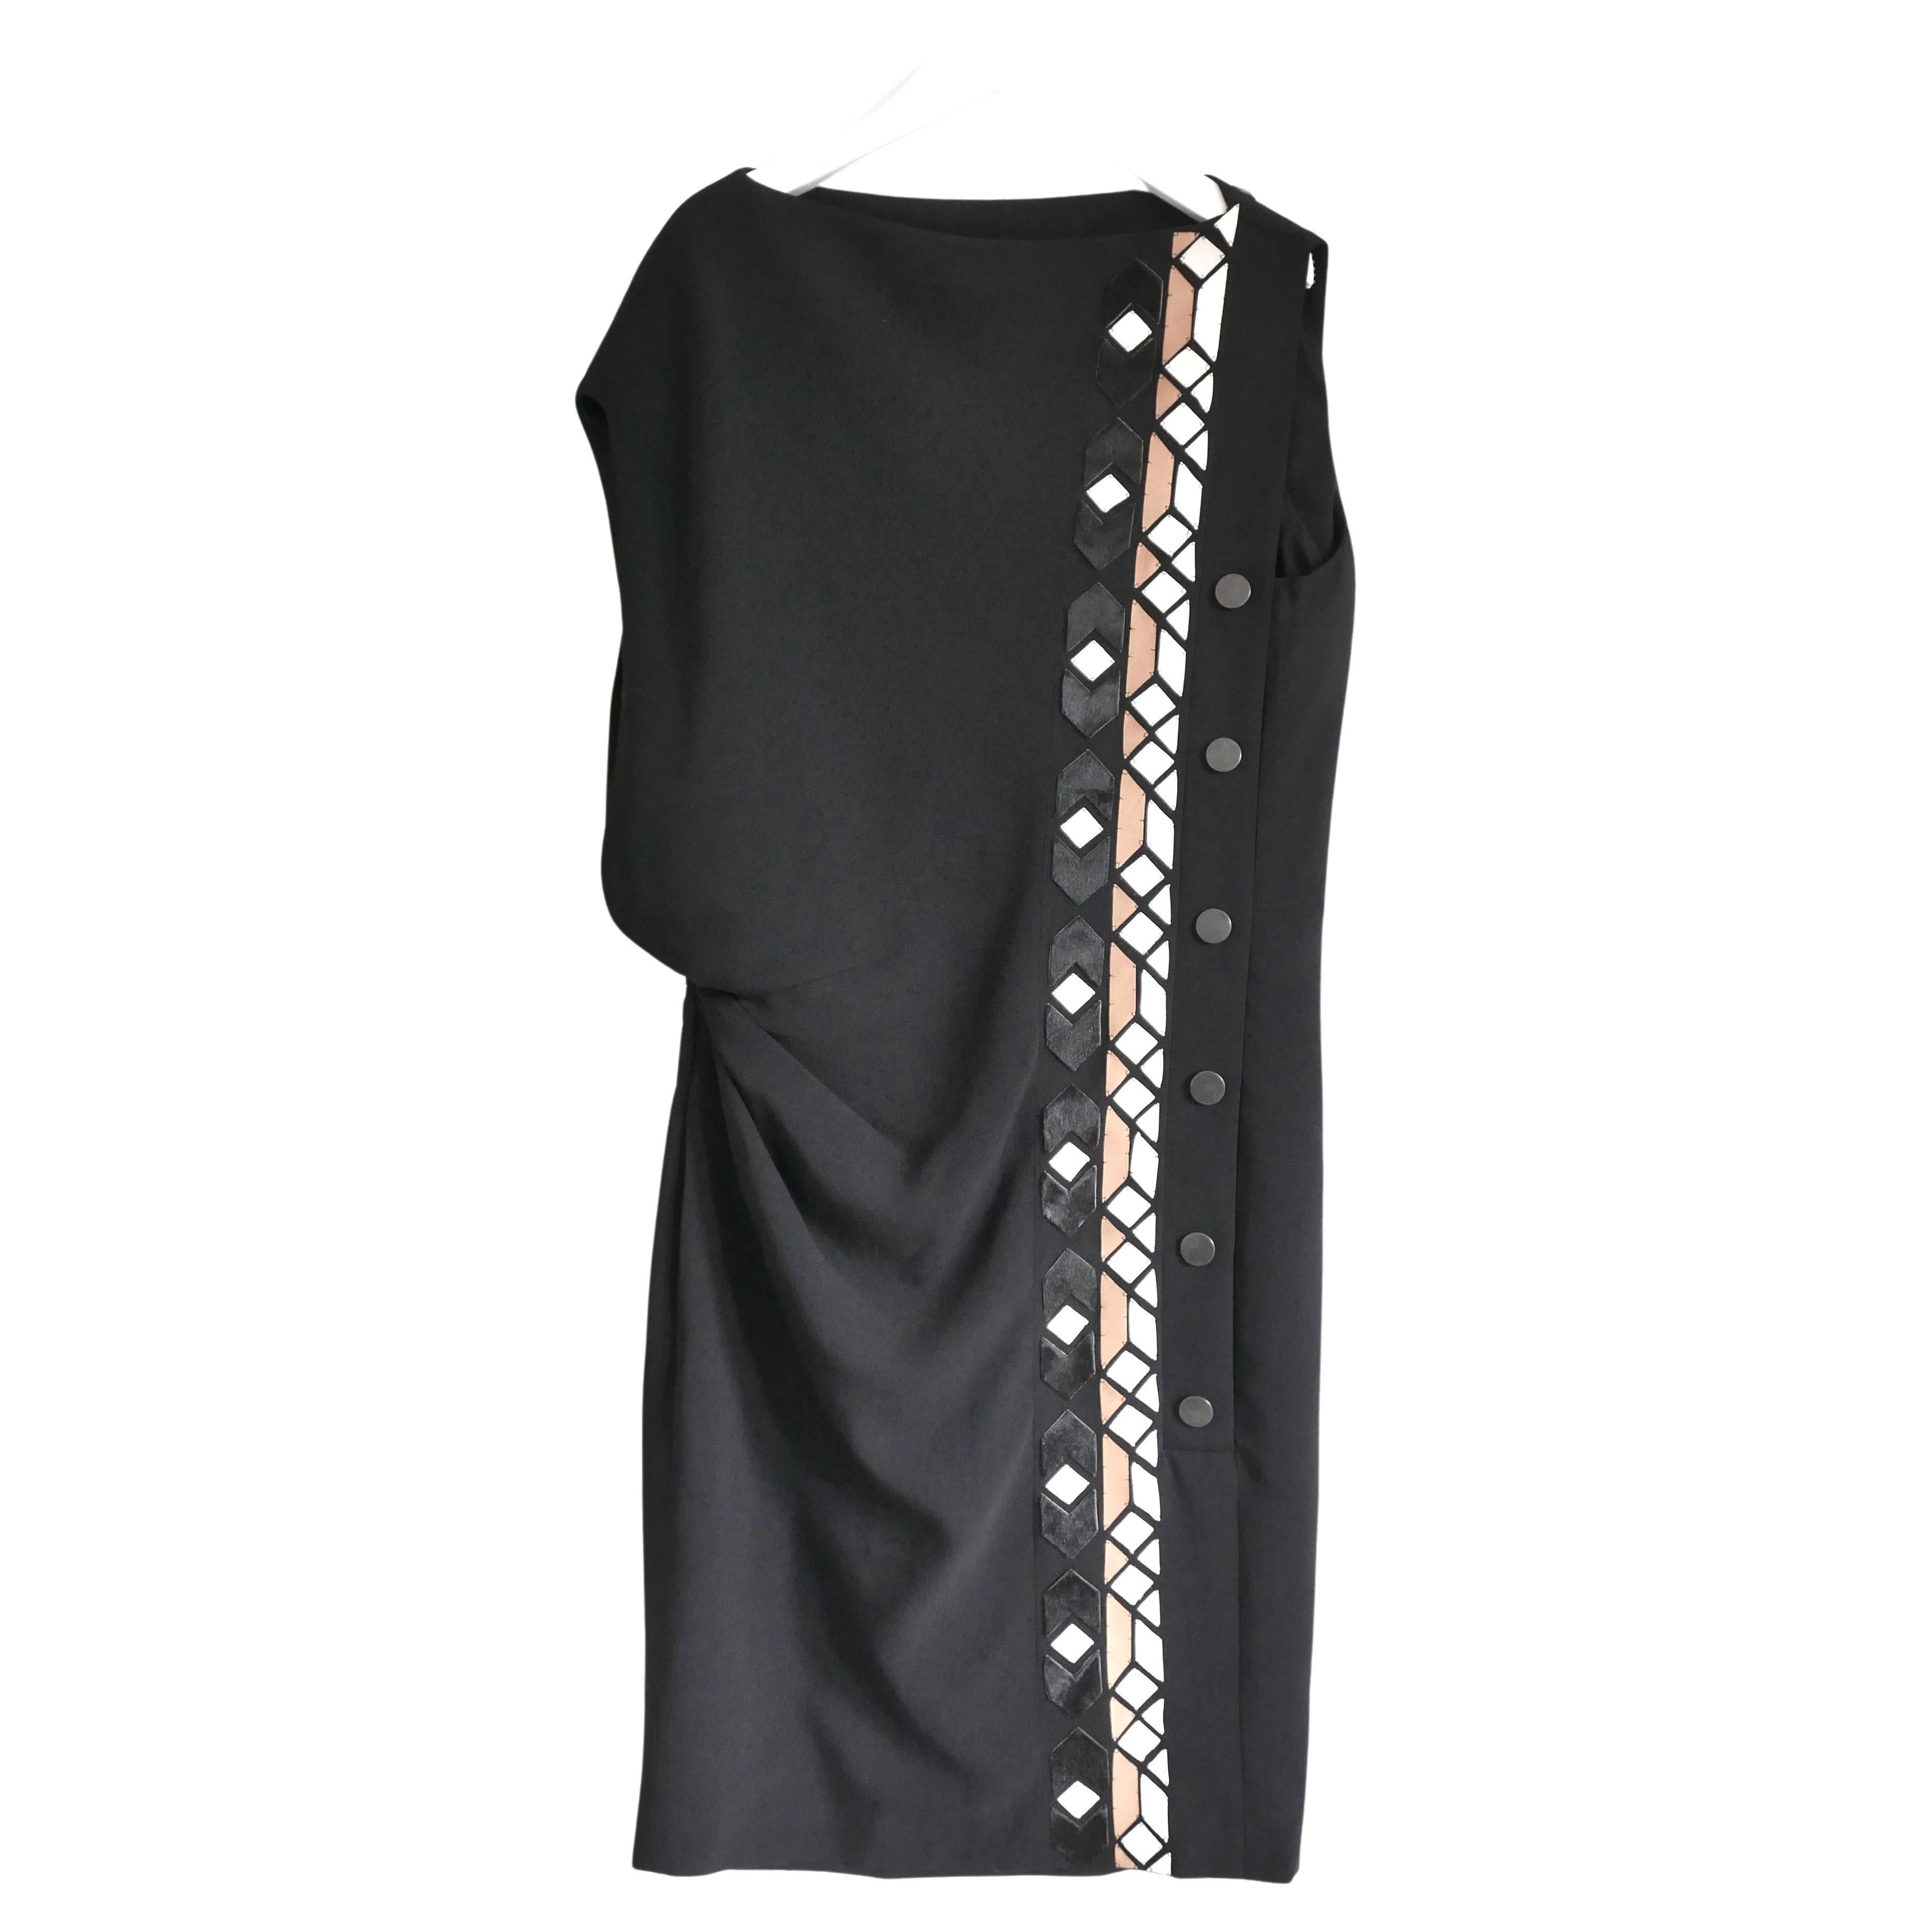 Givenchy x Riccardo Tisci Pre-Fall 2013 Leather Embellished Dress For Sale